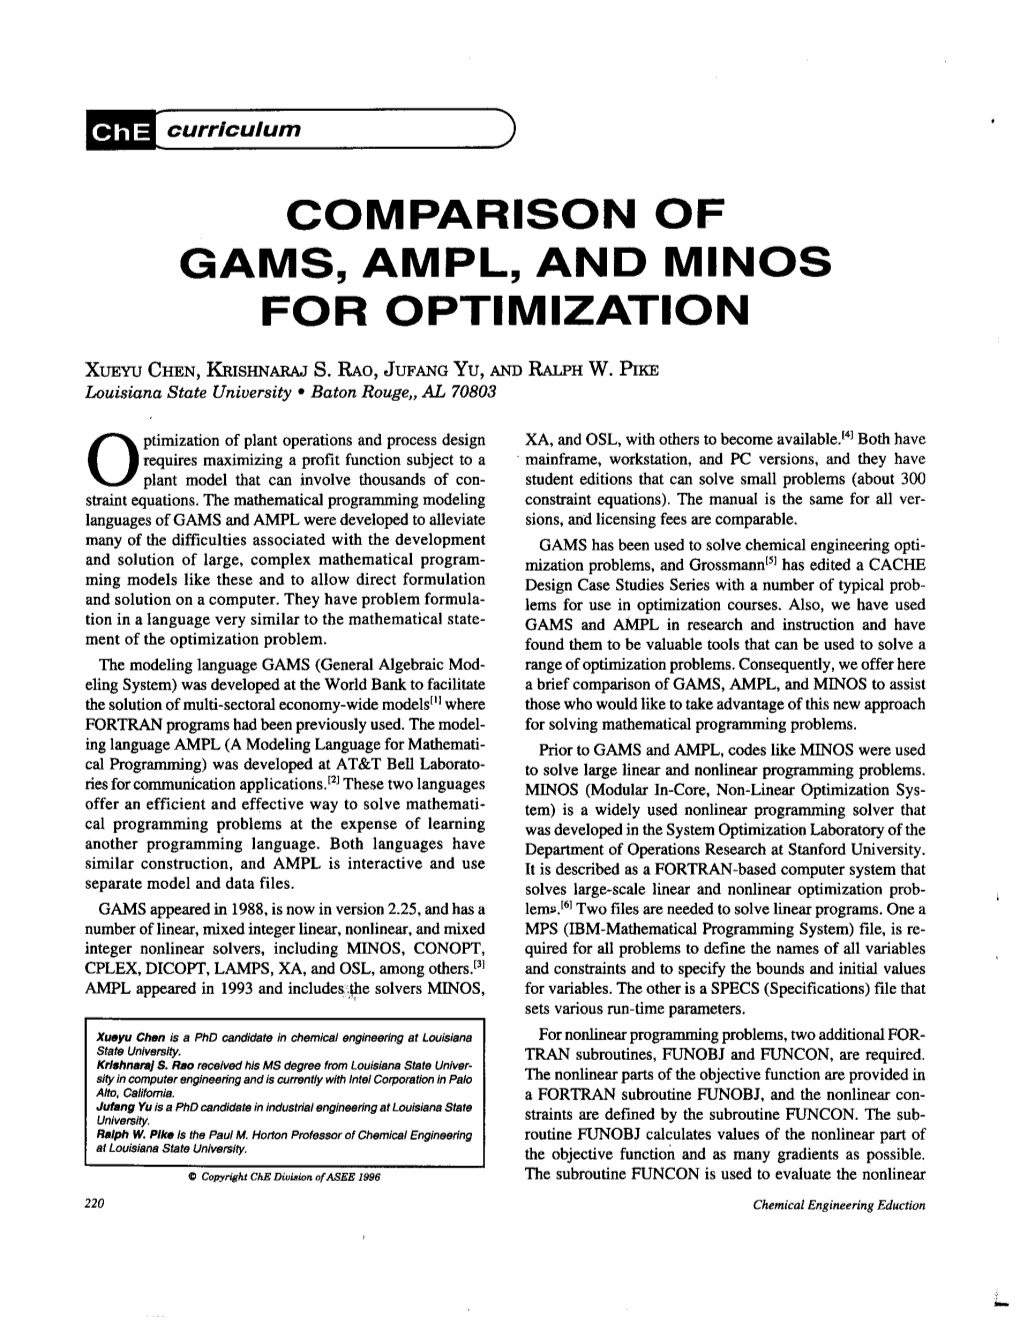 Comparison of Gams, Ampl, and Minos for Optimization